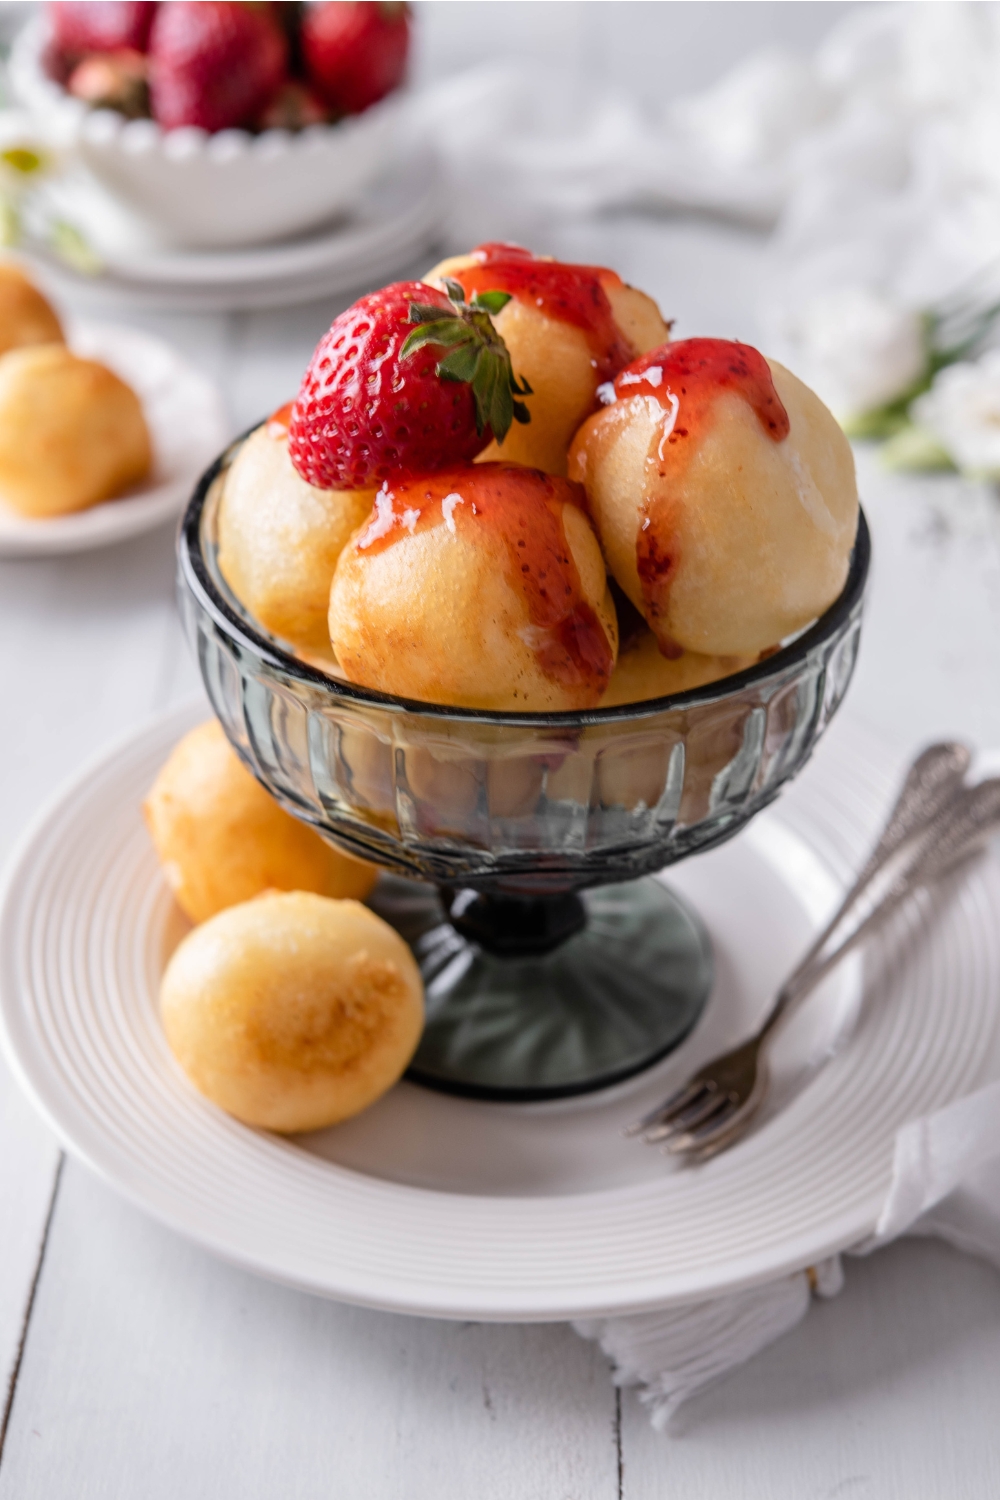 A dessert bowl with Fried cheesecake balls drizzled in strawberry syrup with a strawberry garnished on top.